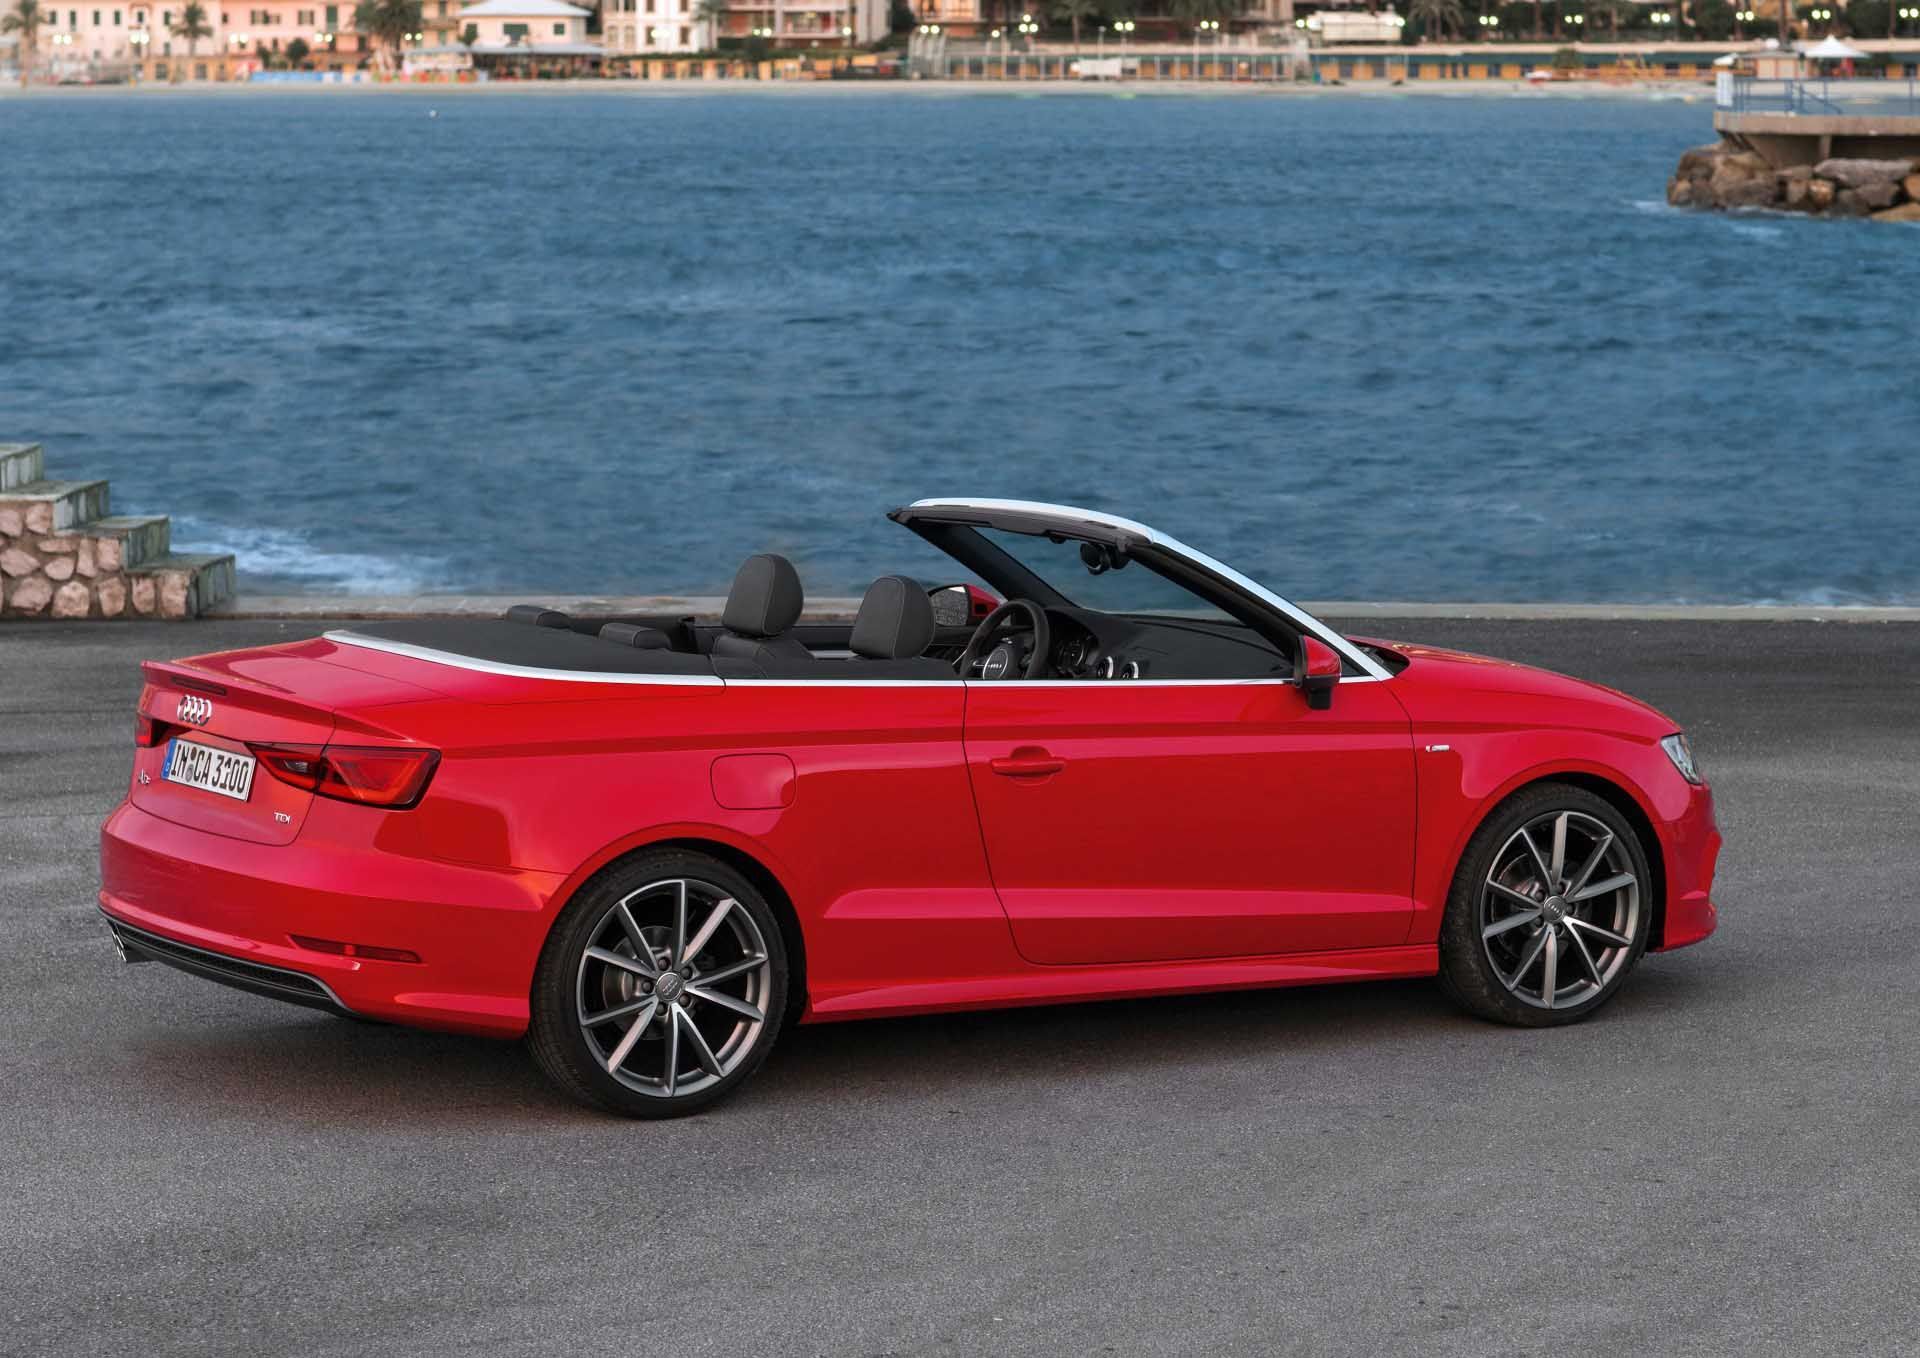 Download Nice Audi A3 Cabriolet Side View Full HD Wallpaper Full Size. Audi a3 cabriolet, Audi, Sports car